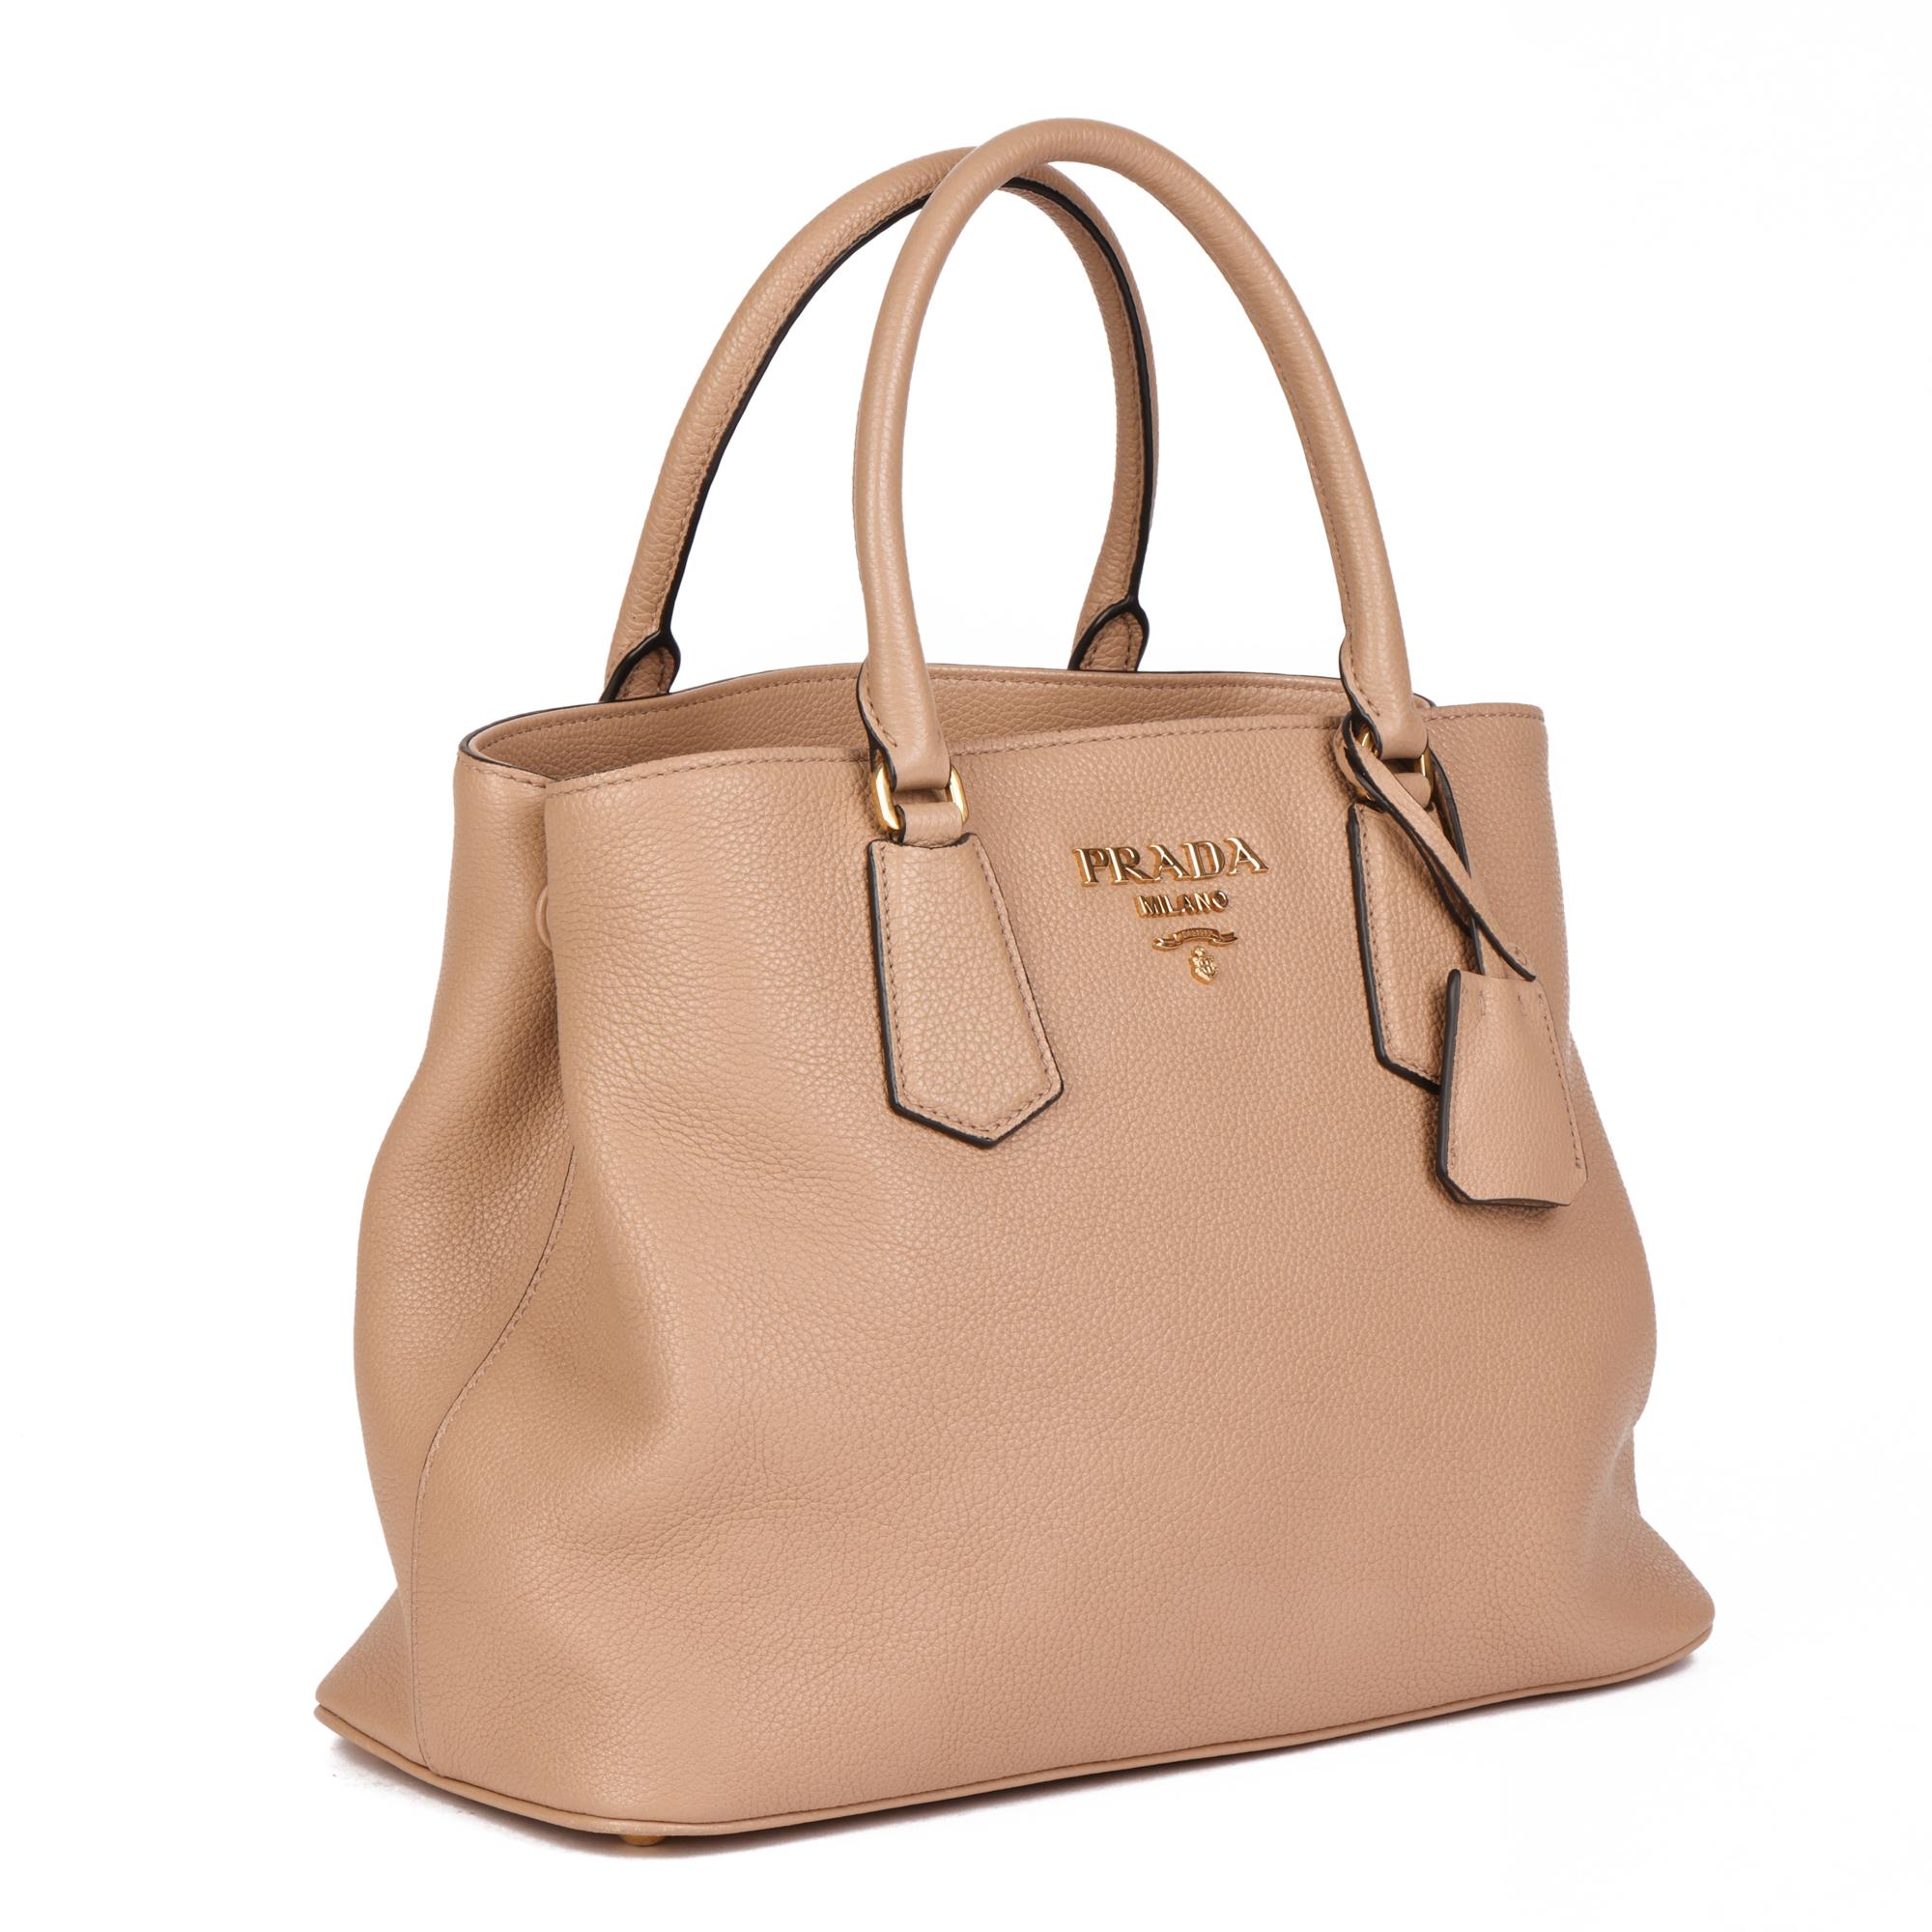 PRADA
Cameo Beige Calfskin Leather Tote Bag

Xupes Reference: HB4268
Serial Number: 203
Age (Circa): 2019
Accompanied By: Prada Dust Bag, Authenticity Card, Prada Invoice, Clochette, Shoulder Strap
Authenticity Details: Authenticity Card, Serial